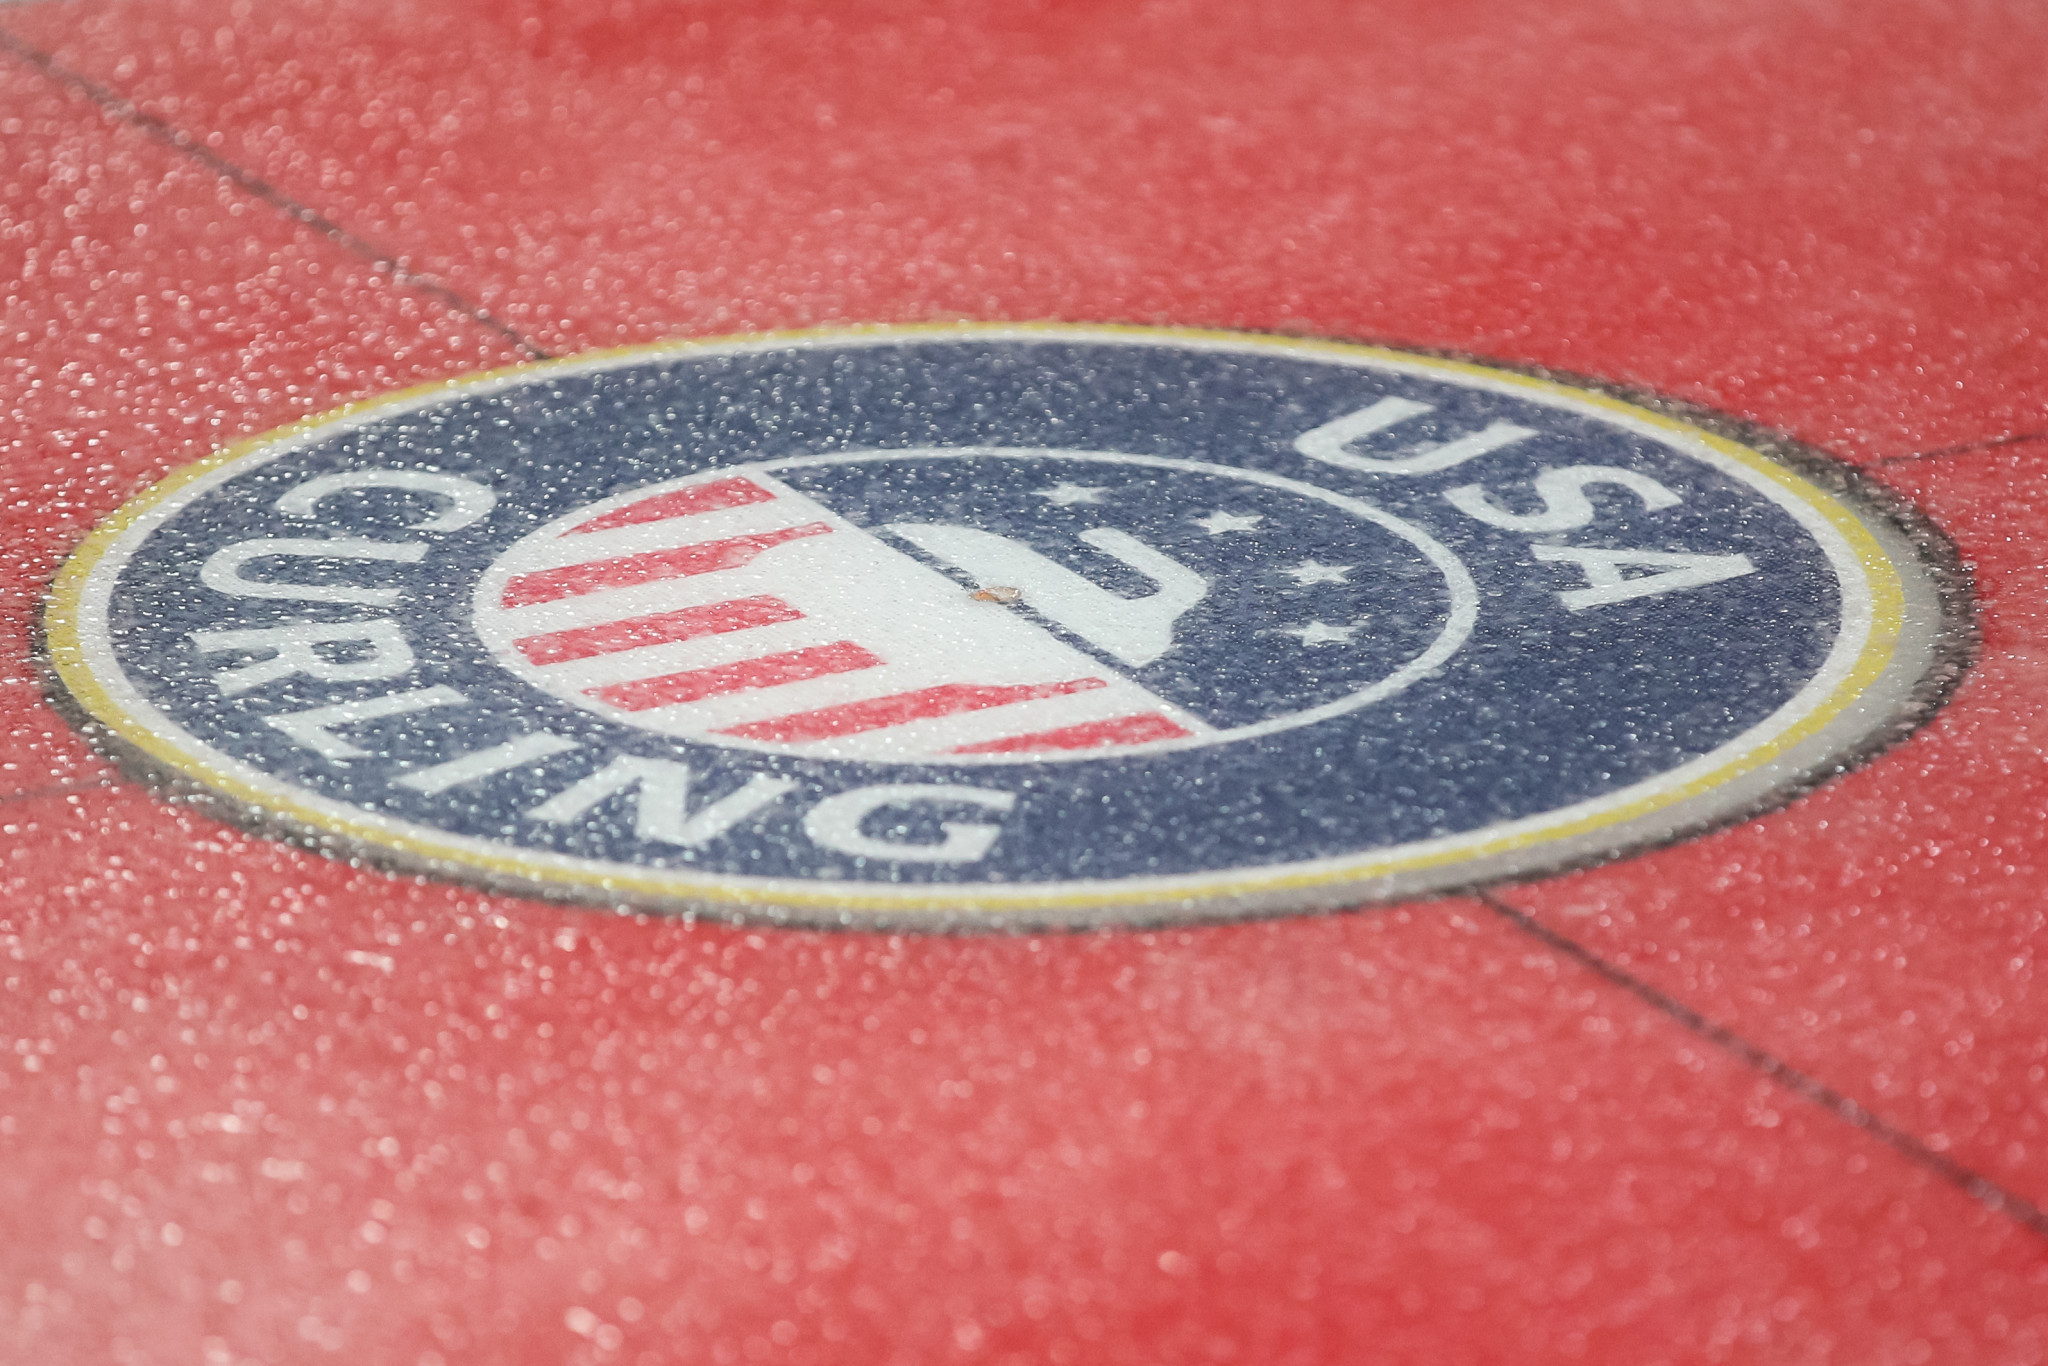 USA Curling chief executive Plush resigns following damning NWSL abuse report